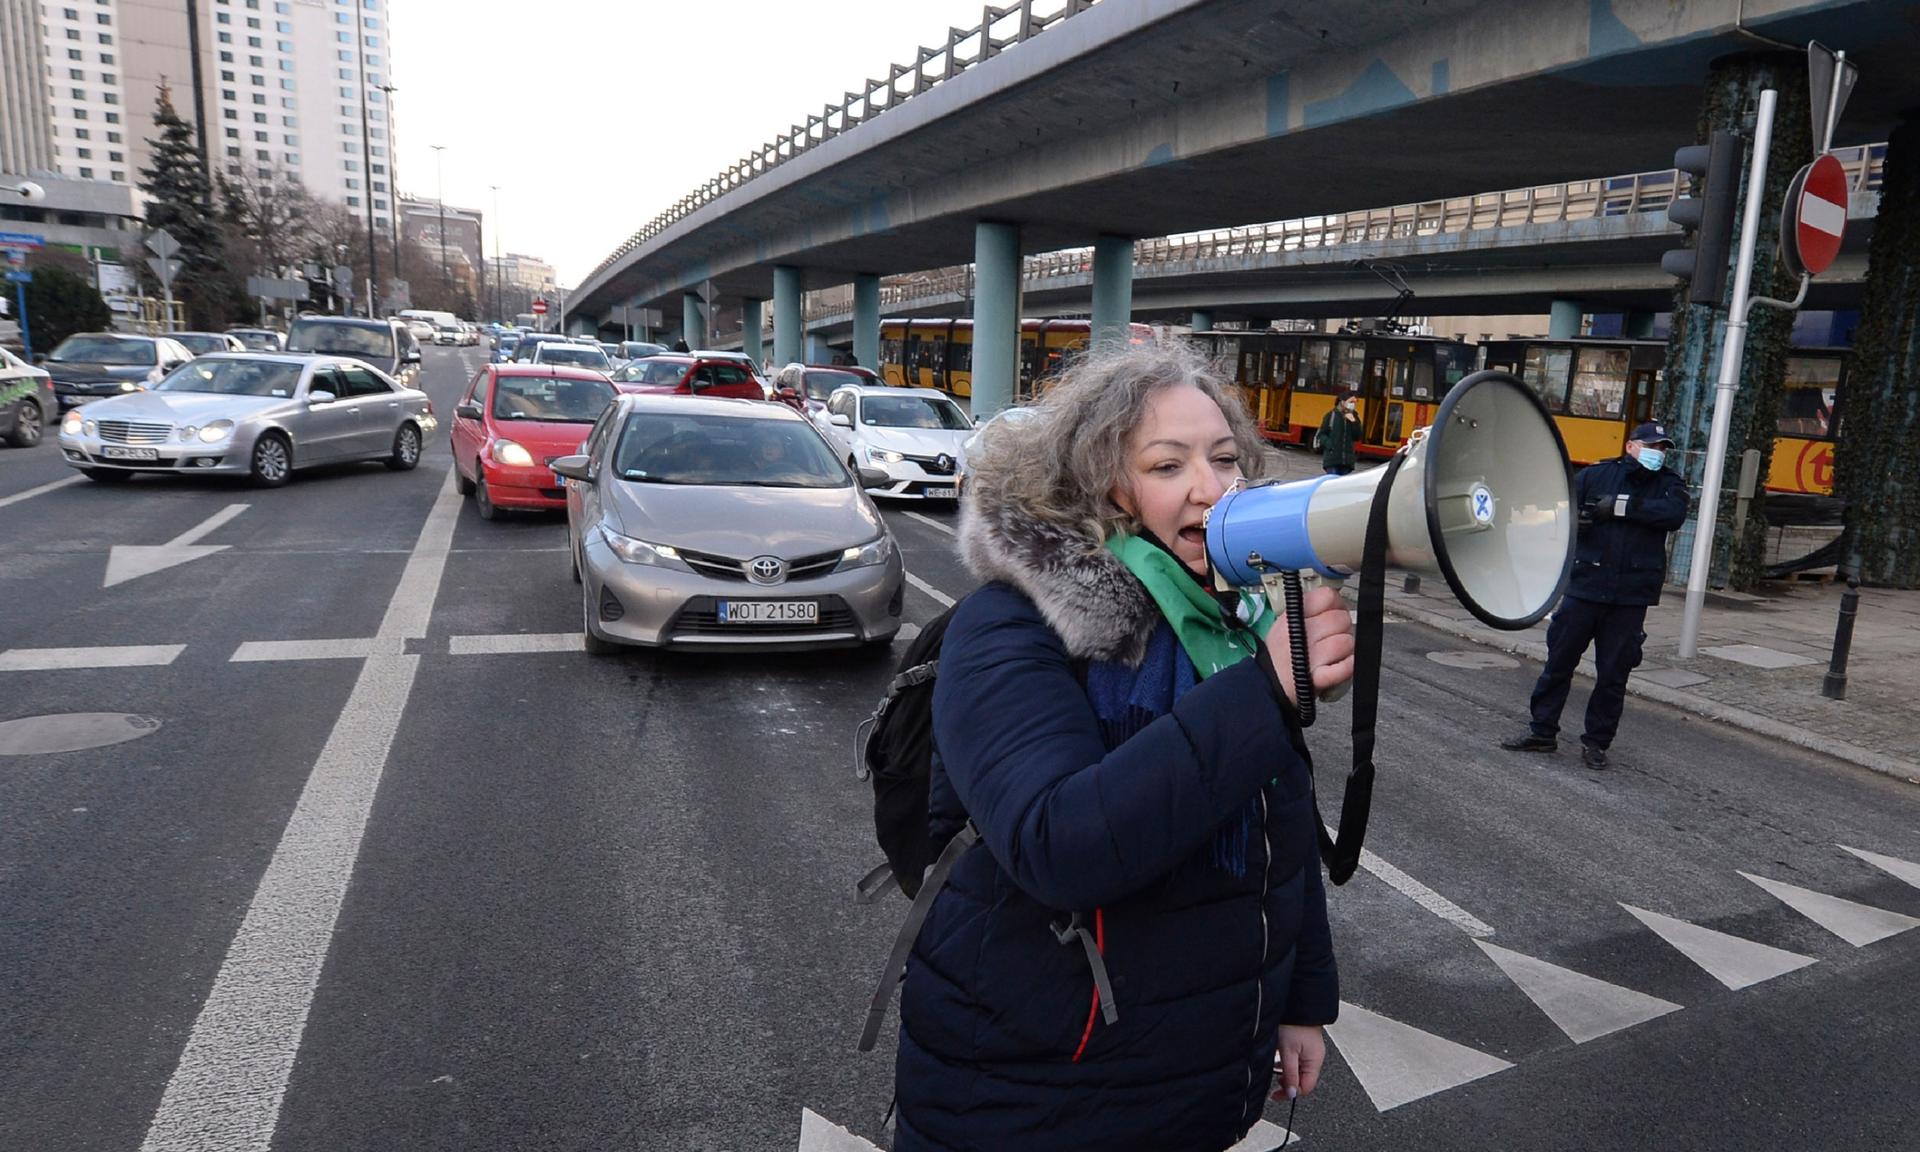 Marta Lempart, a leader of Polish Women's Strike, uses a megaphone to address protesters who gathered for a protest, on International Women's Day in Warsaw, Poland, Monday March 8, 2021. 